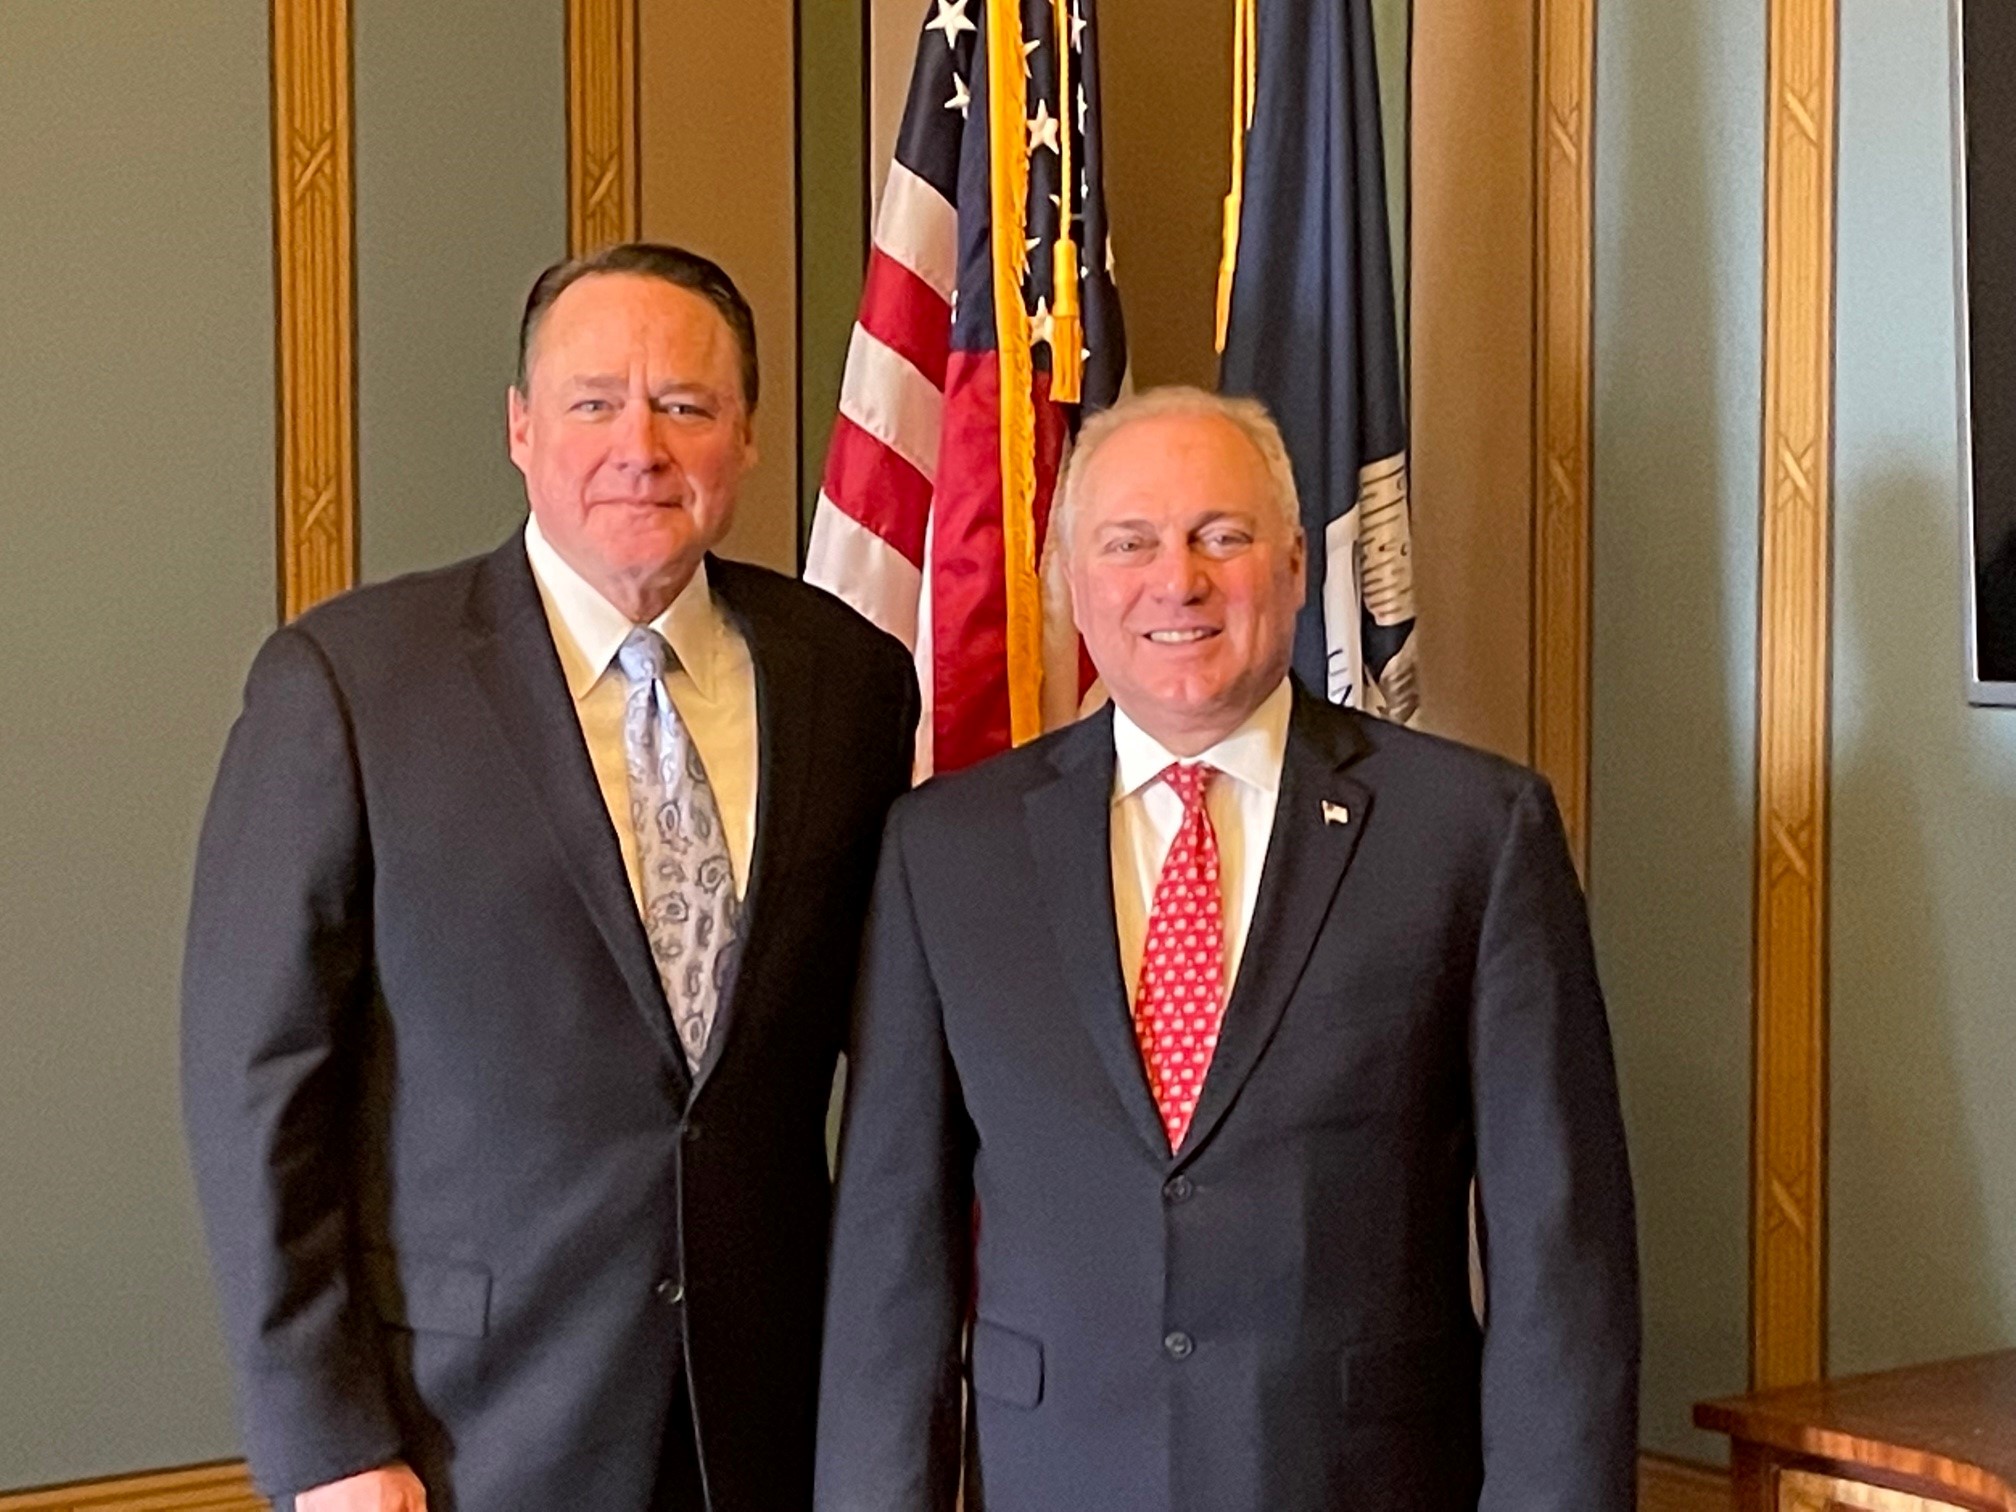 NAFCU's Berger with Rep. Scalise